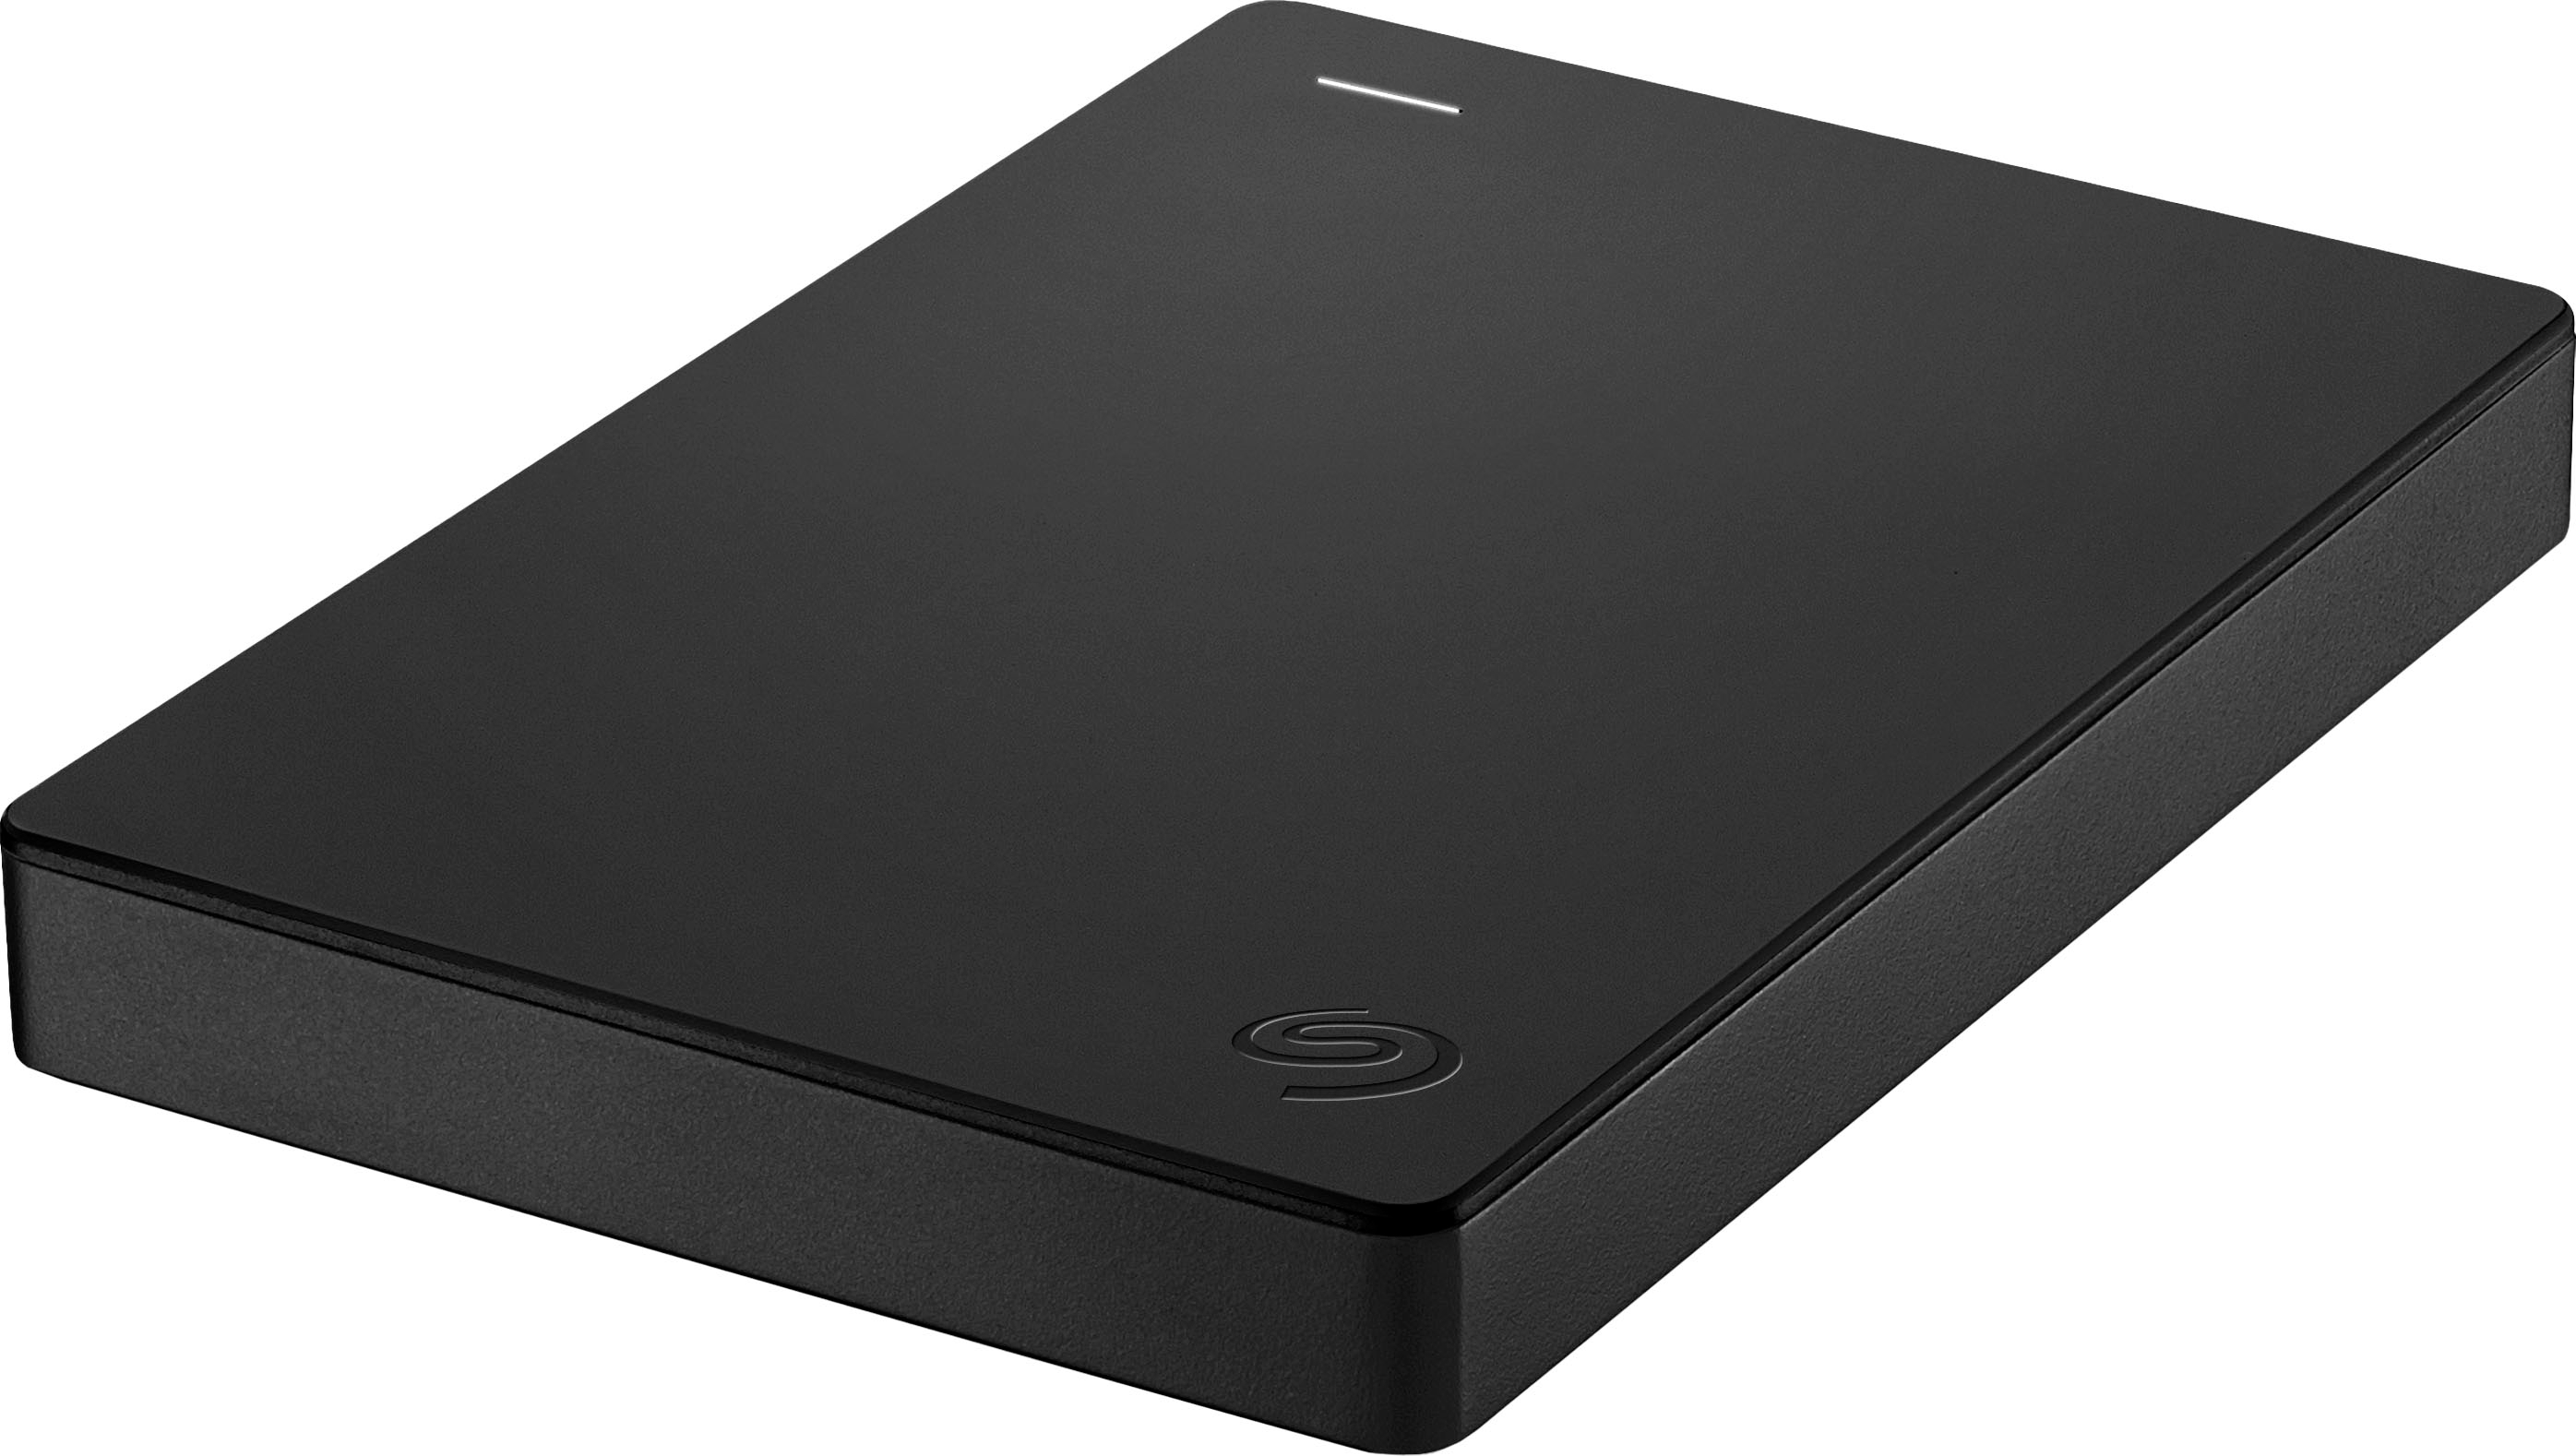 Seagate 1TB External USB 3.0 Portable Hard Drive with Rescue Data